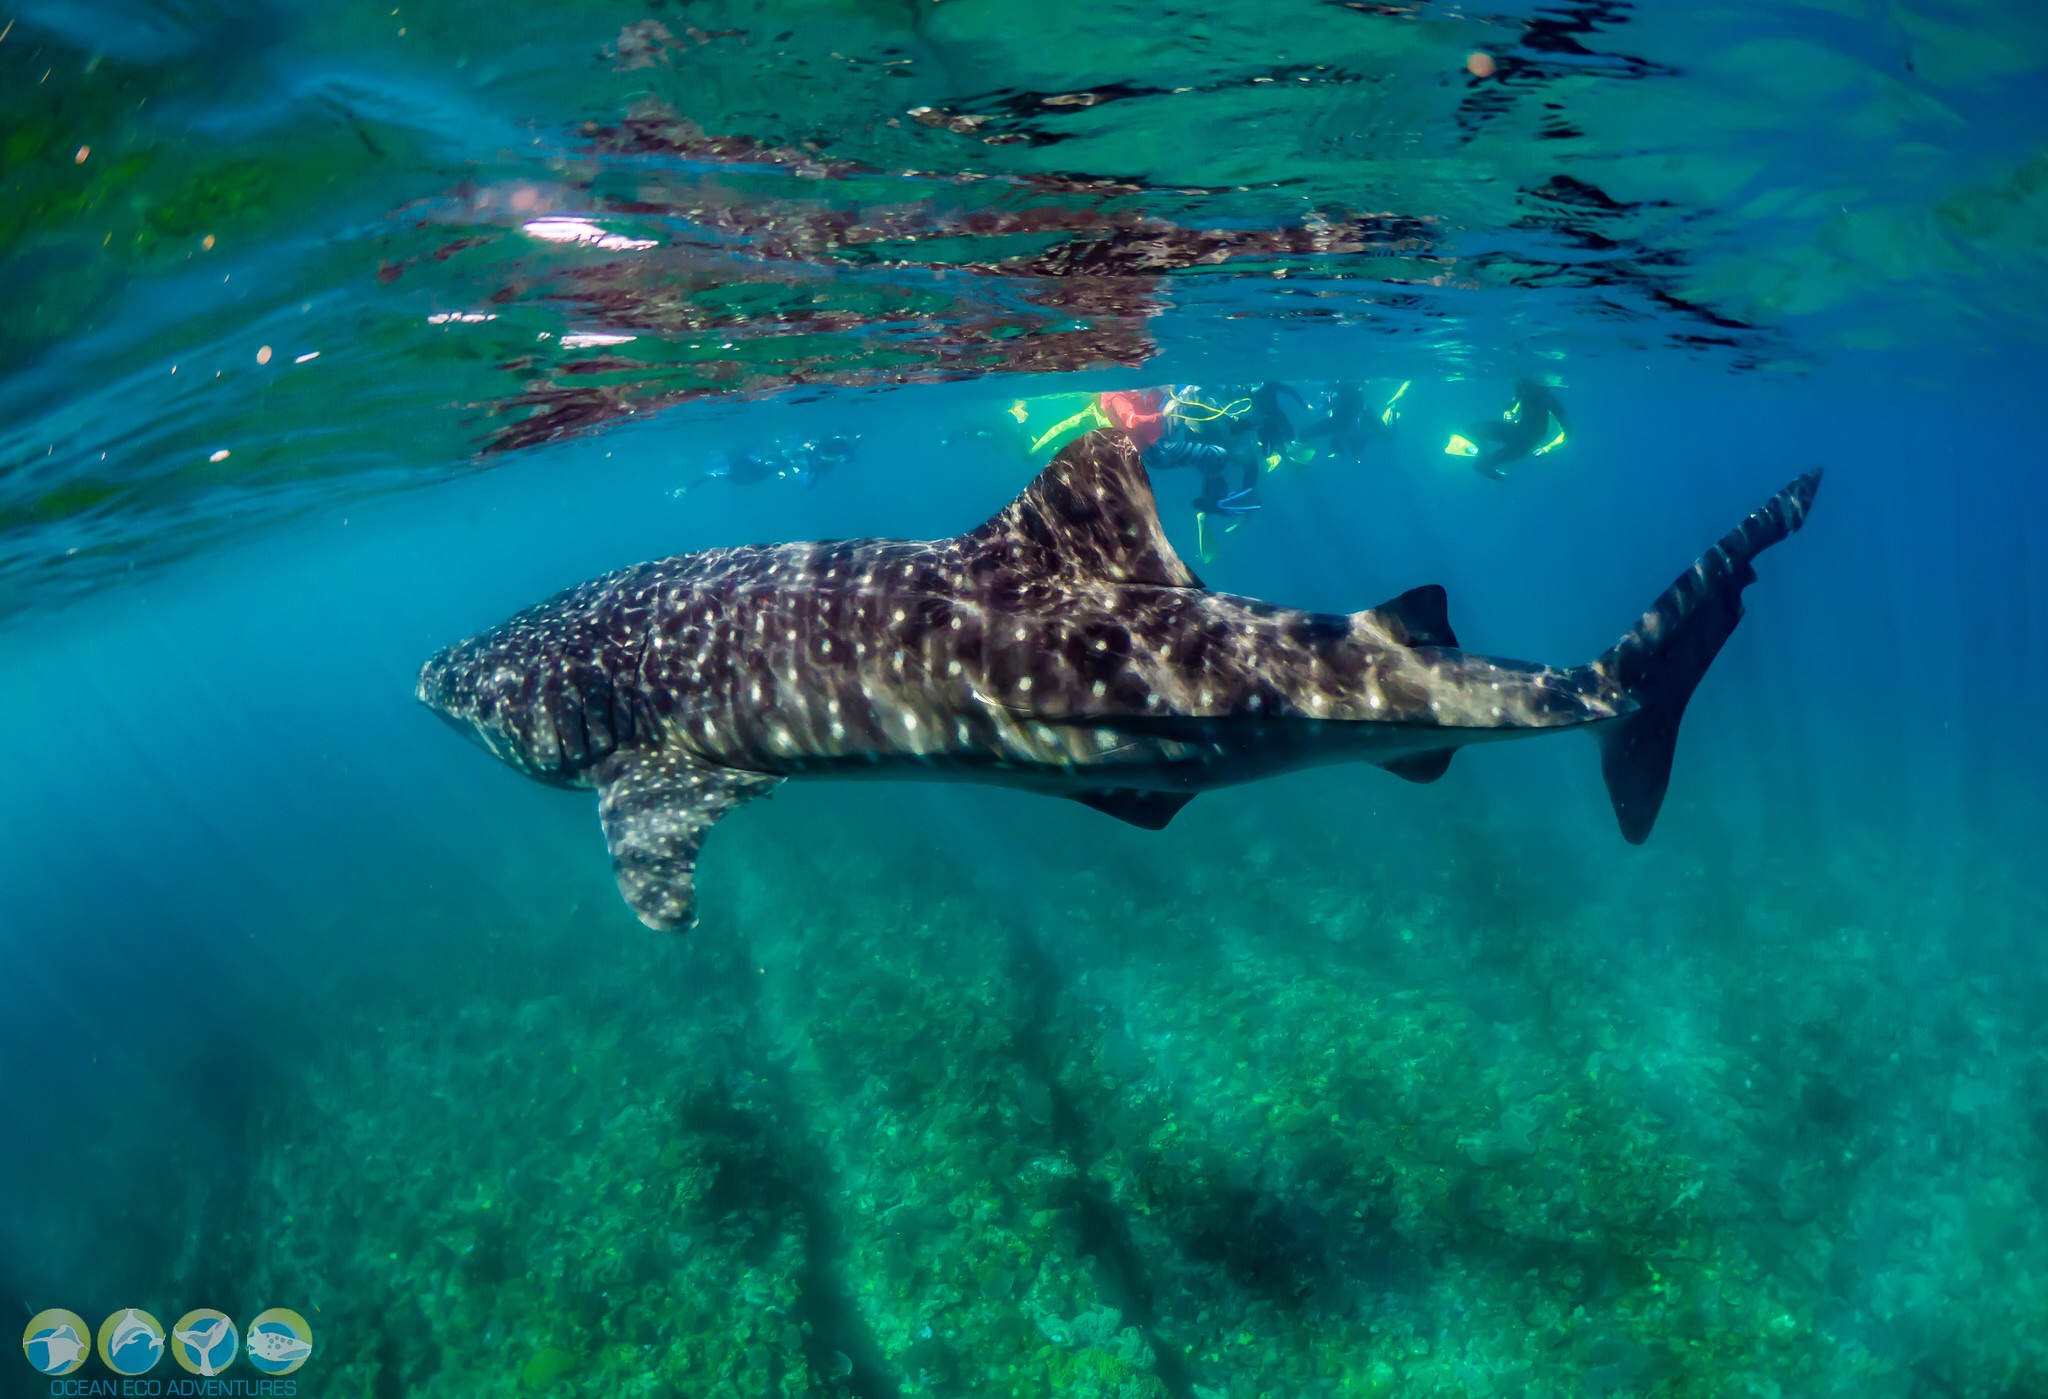 Review Of The Ocean Eco Adventures Whale Shark Tour, Exmouth Western Australia.